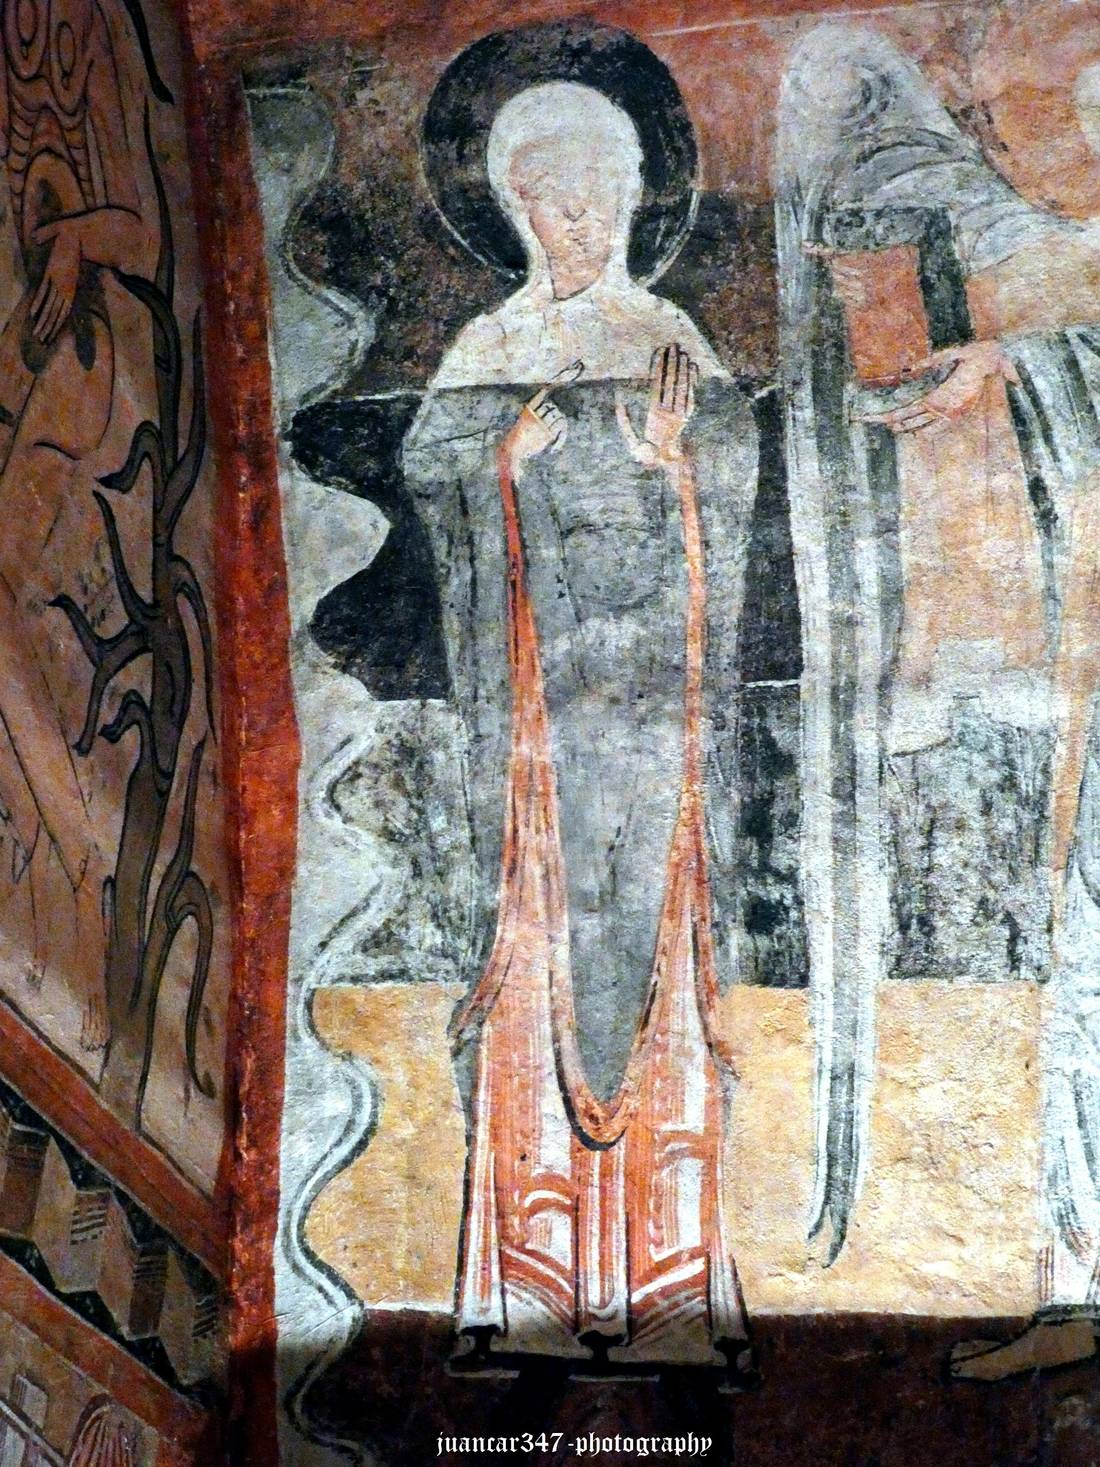 Representation of the Virgin: She, like Christ, are the only ones represented with a black halo behind her head